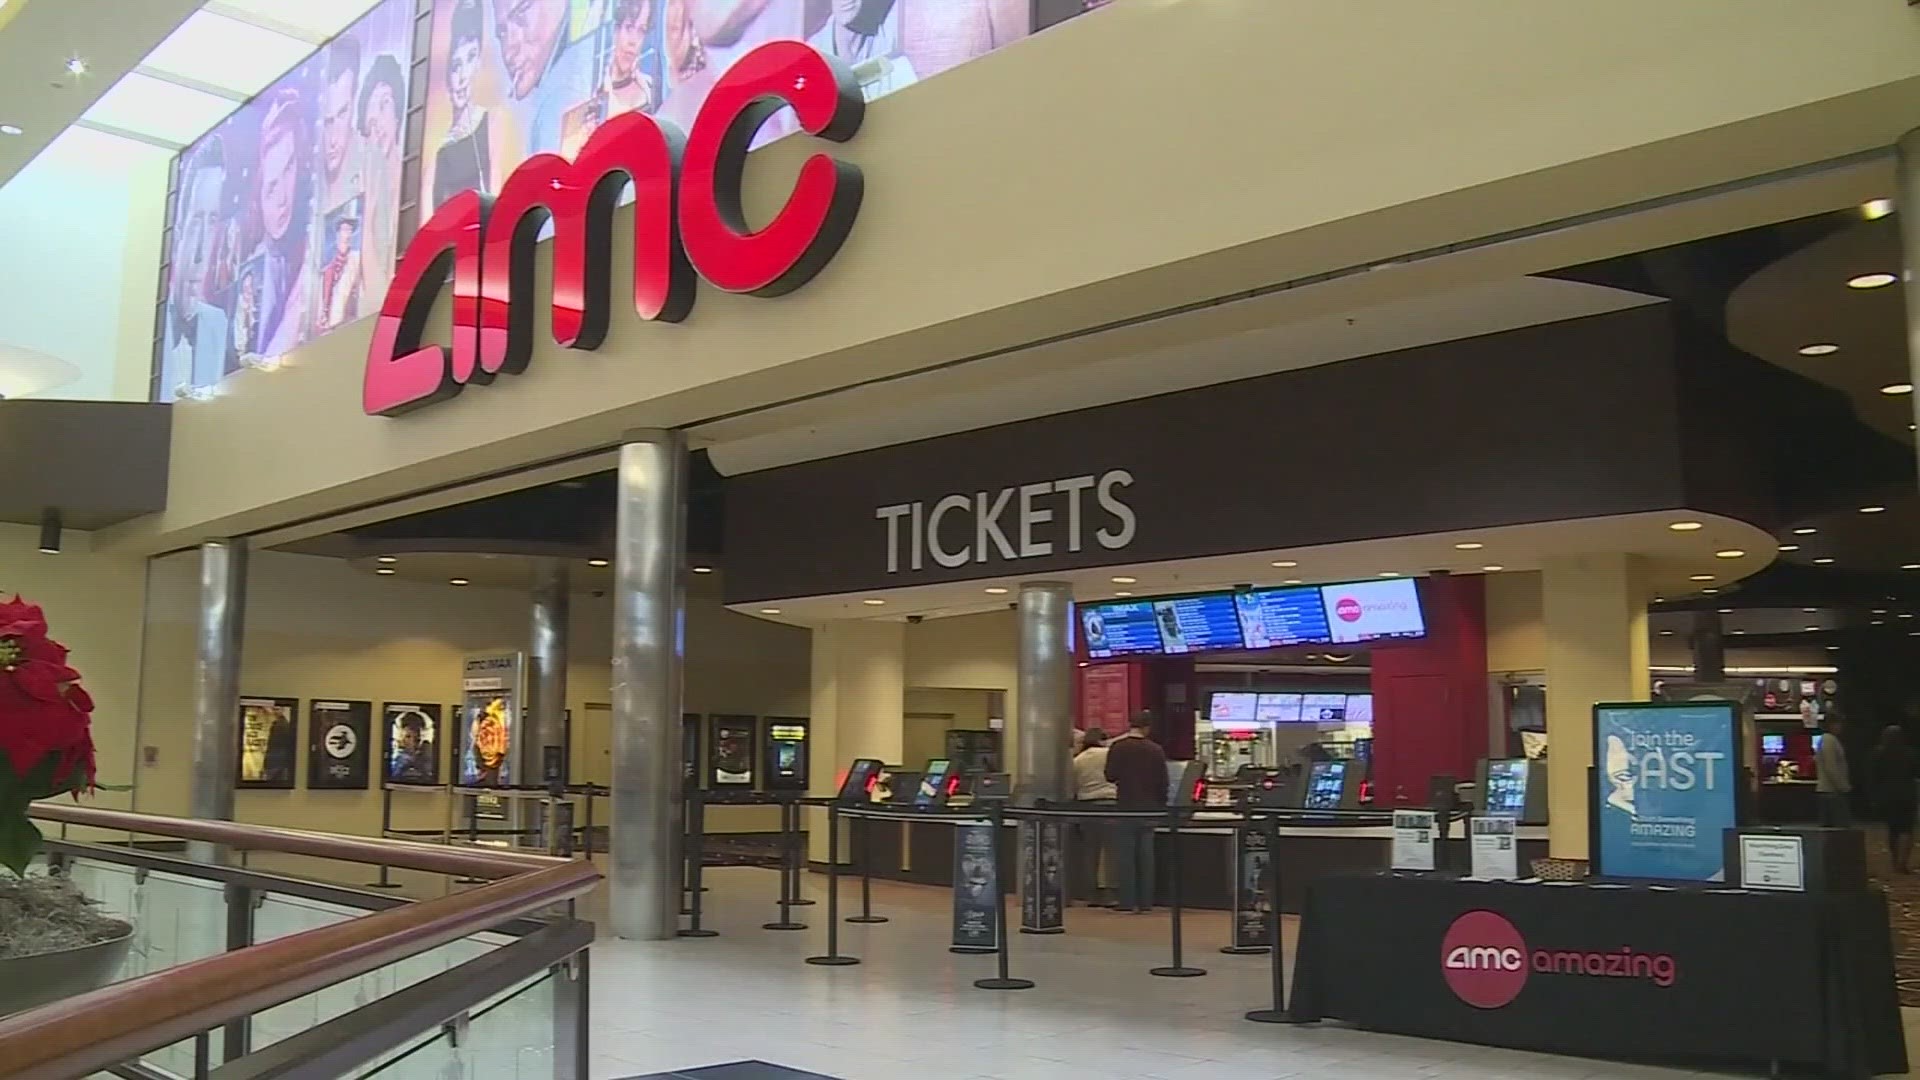 NBC has teamed up with AMC theaters to screen some daytimes games live at dozens of locations across the country.